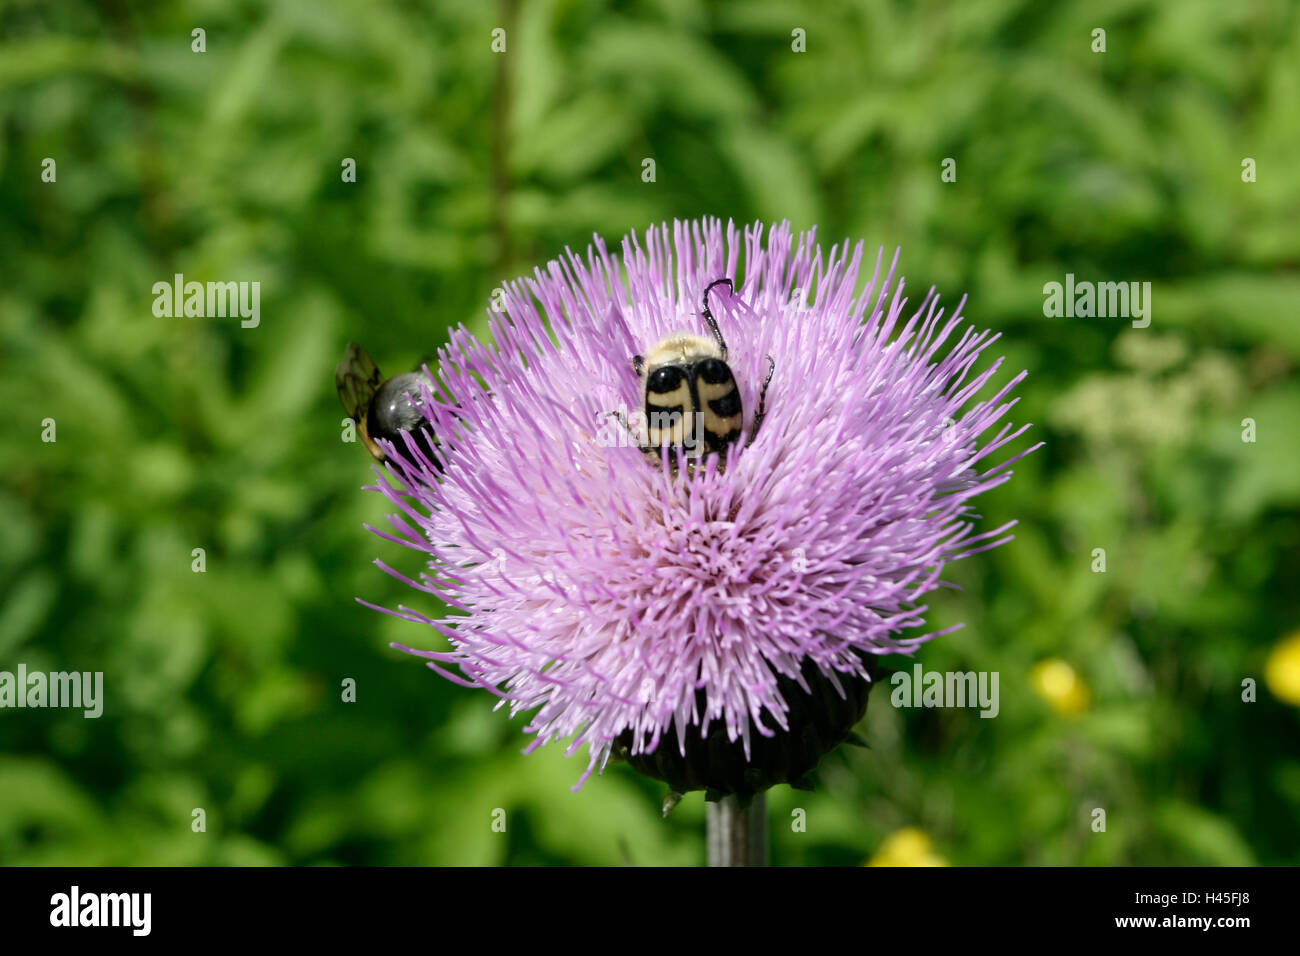 insects collecting nectar from melancholy thistle flower, Finland Stock Photo